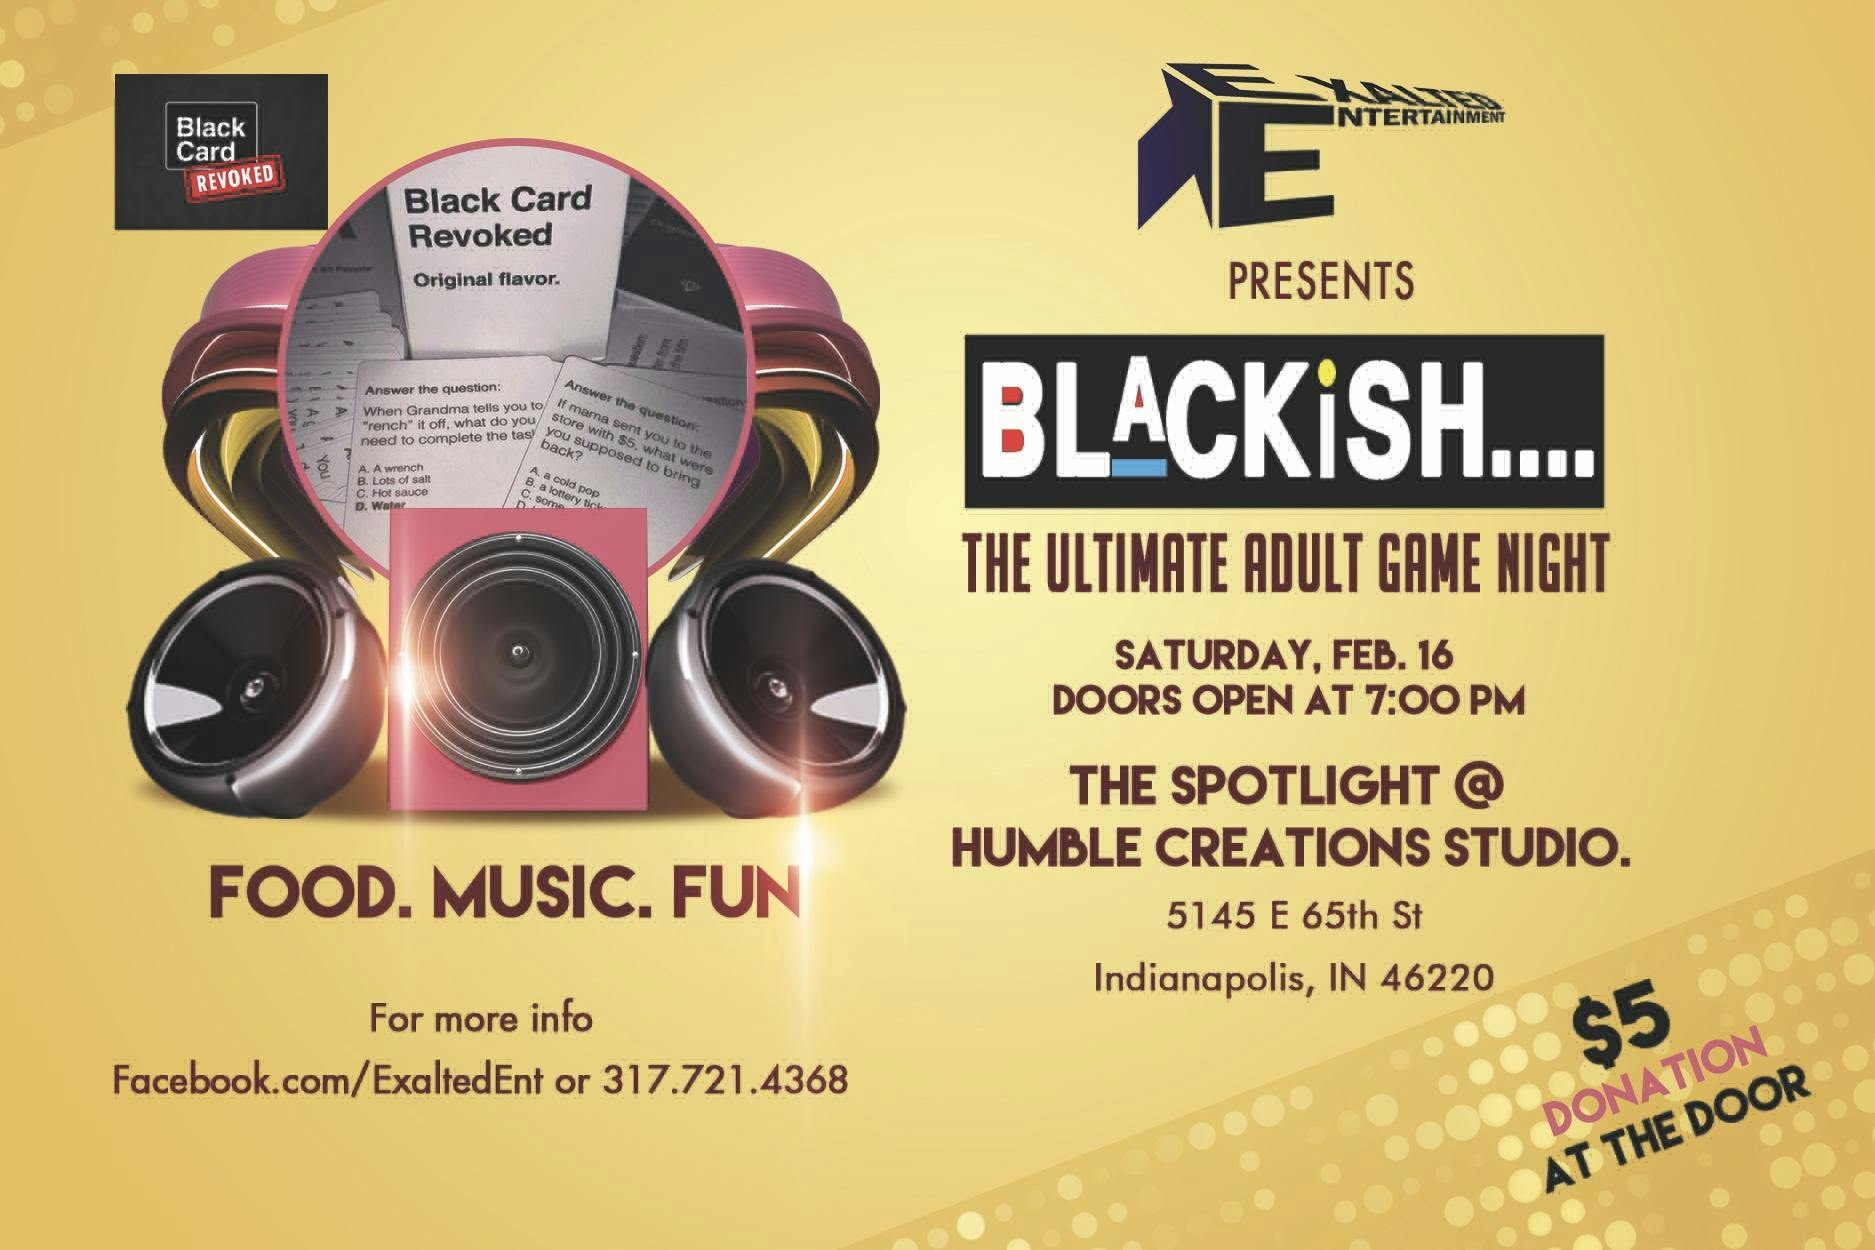 Blackish...The Ultimate Adult Game Night